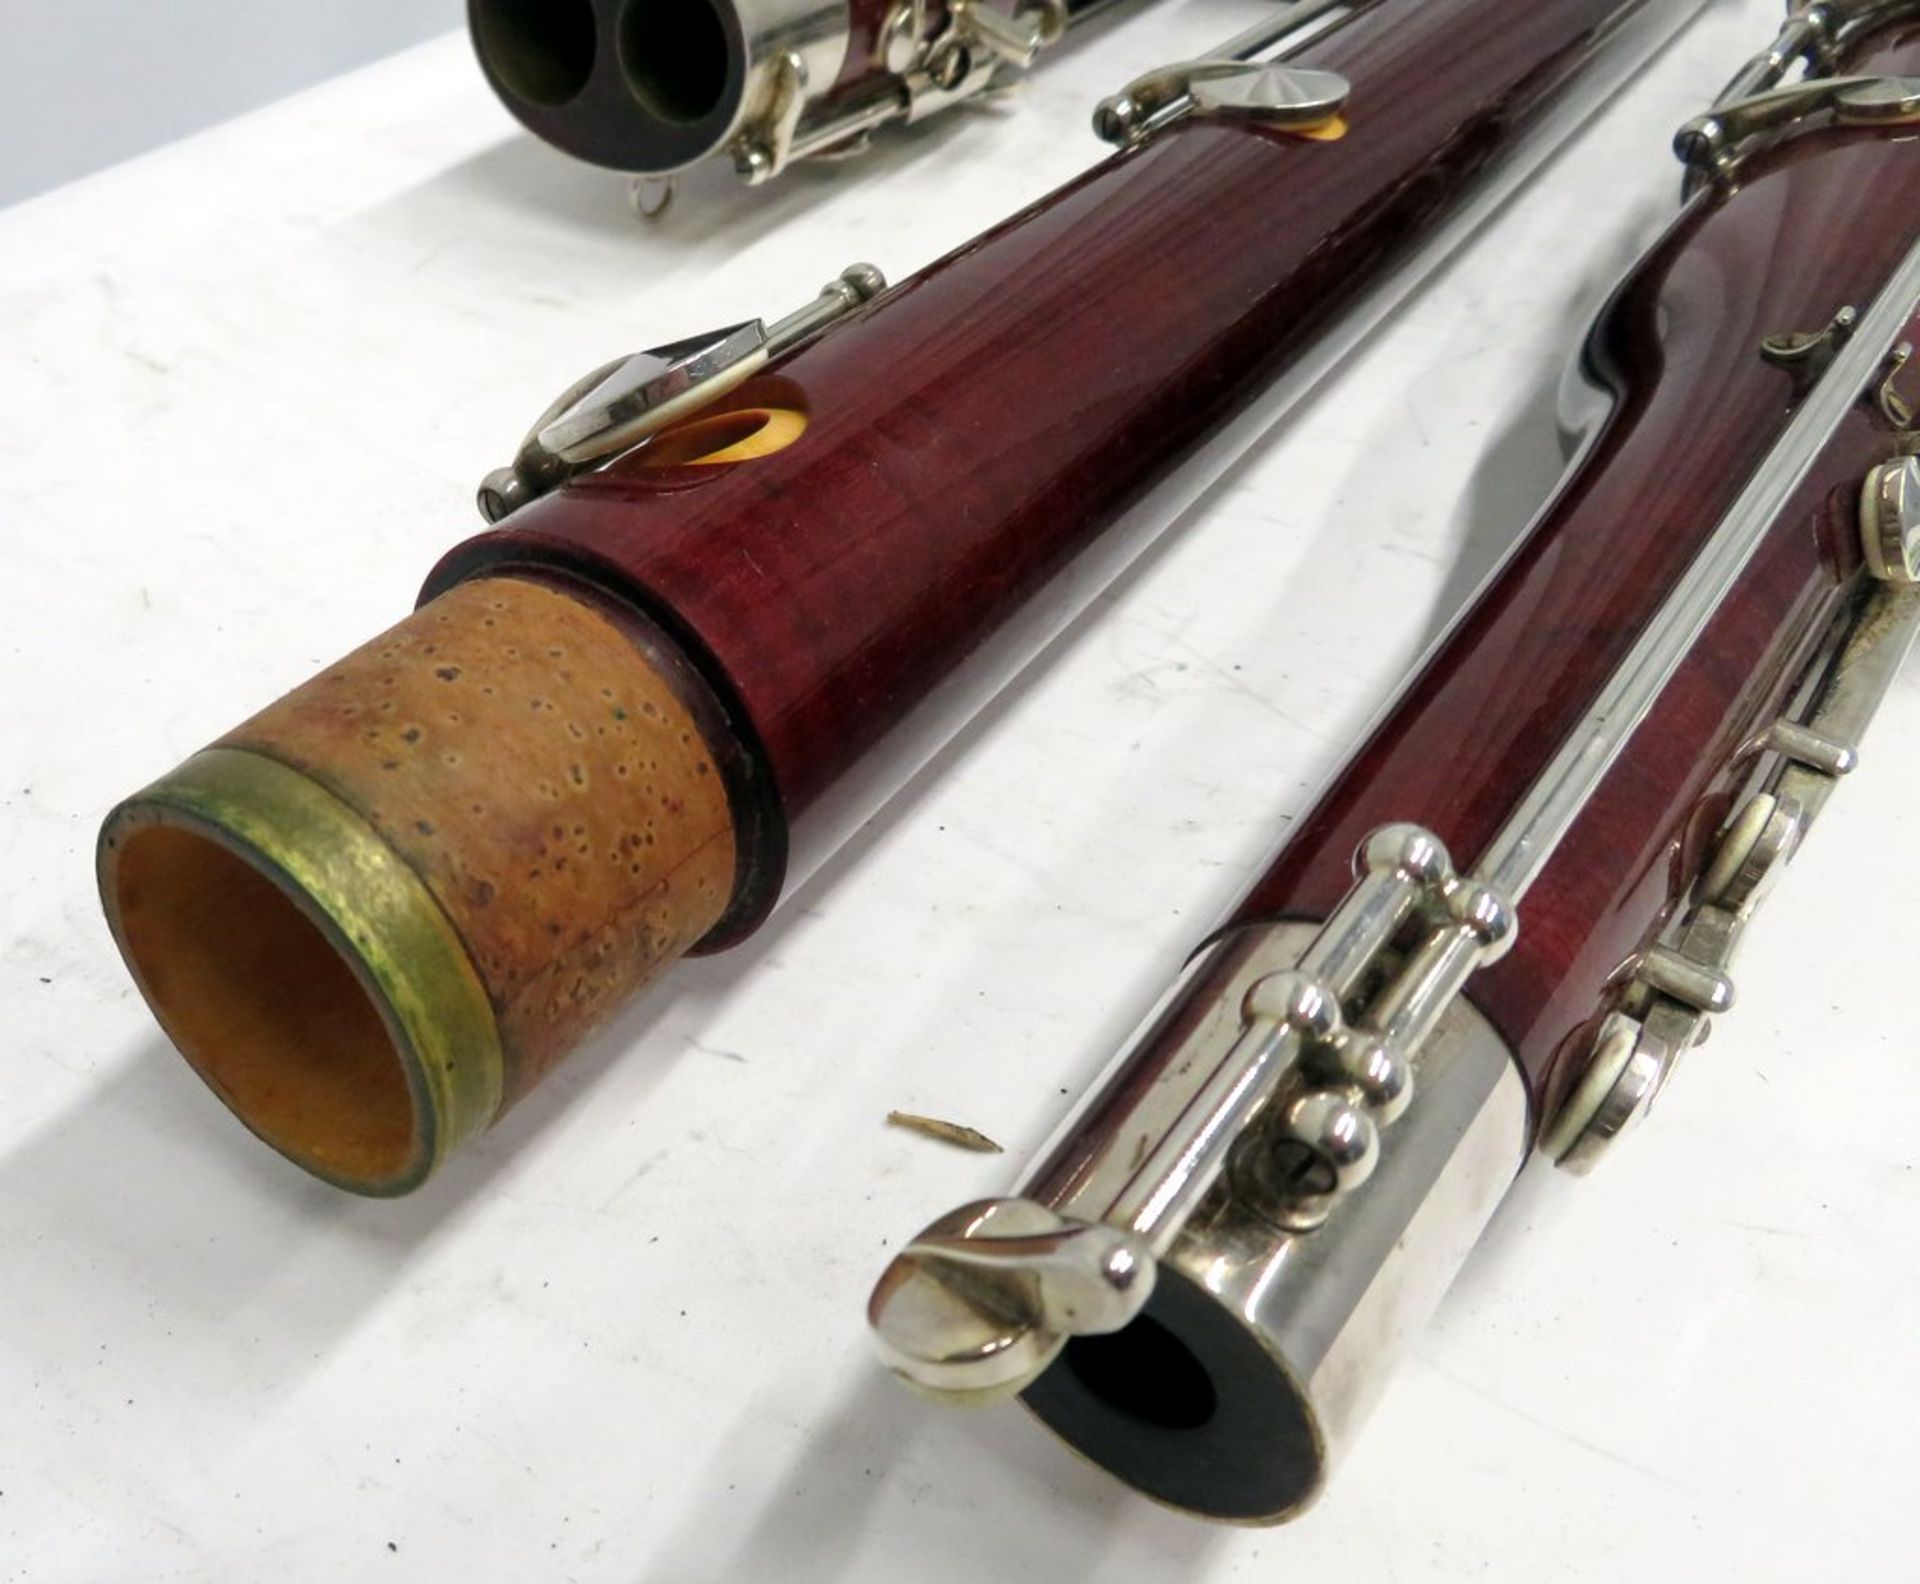 W.Schreiber S71 Bassoon Complete With Case. Serial Number: 31375. Please Note That This - Image 9 of 17